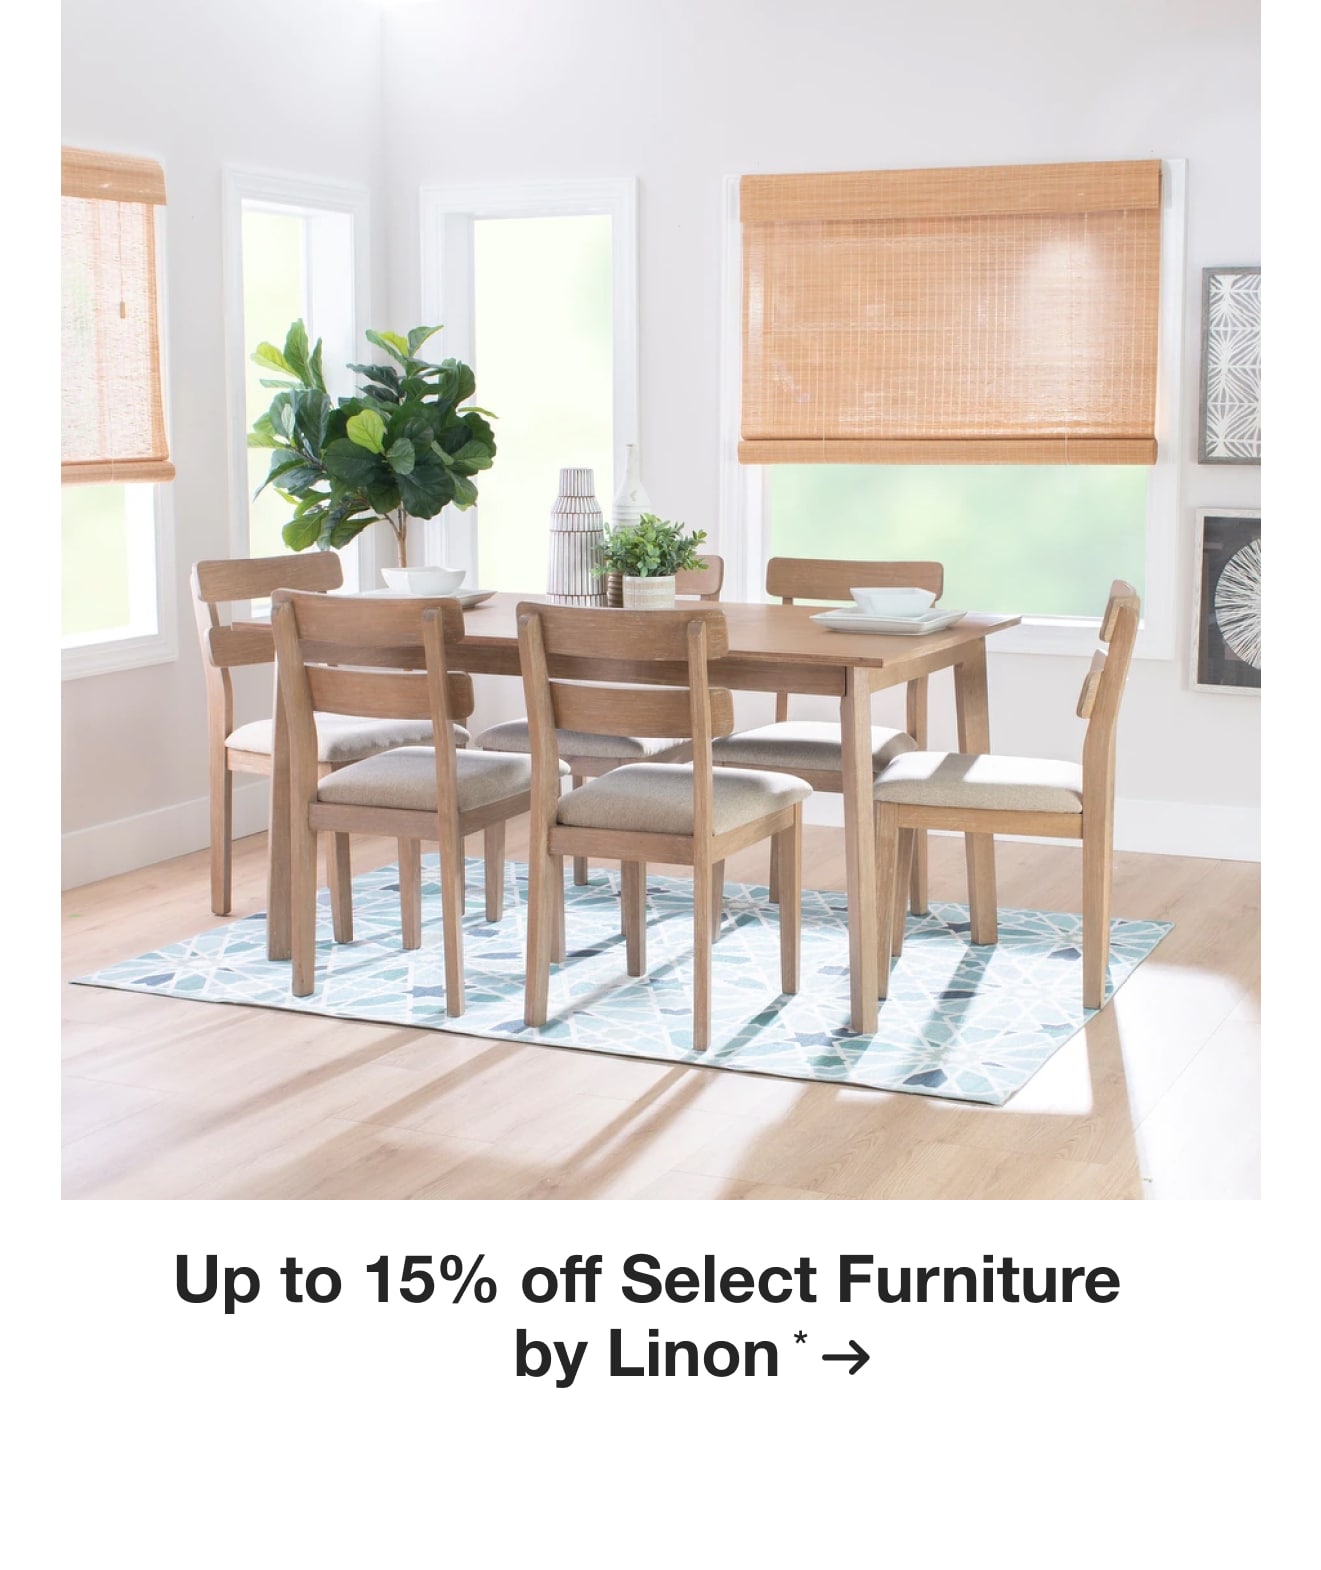 Up to 15% off Select Furniture by Linon*